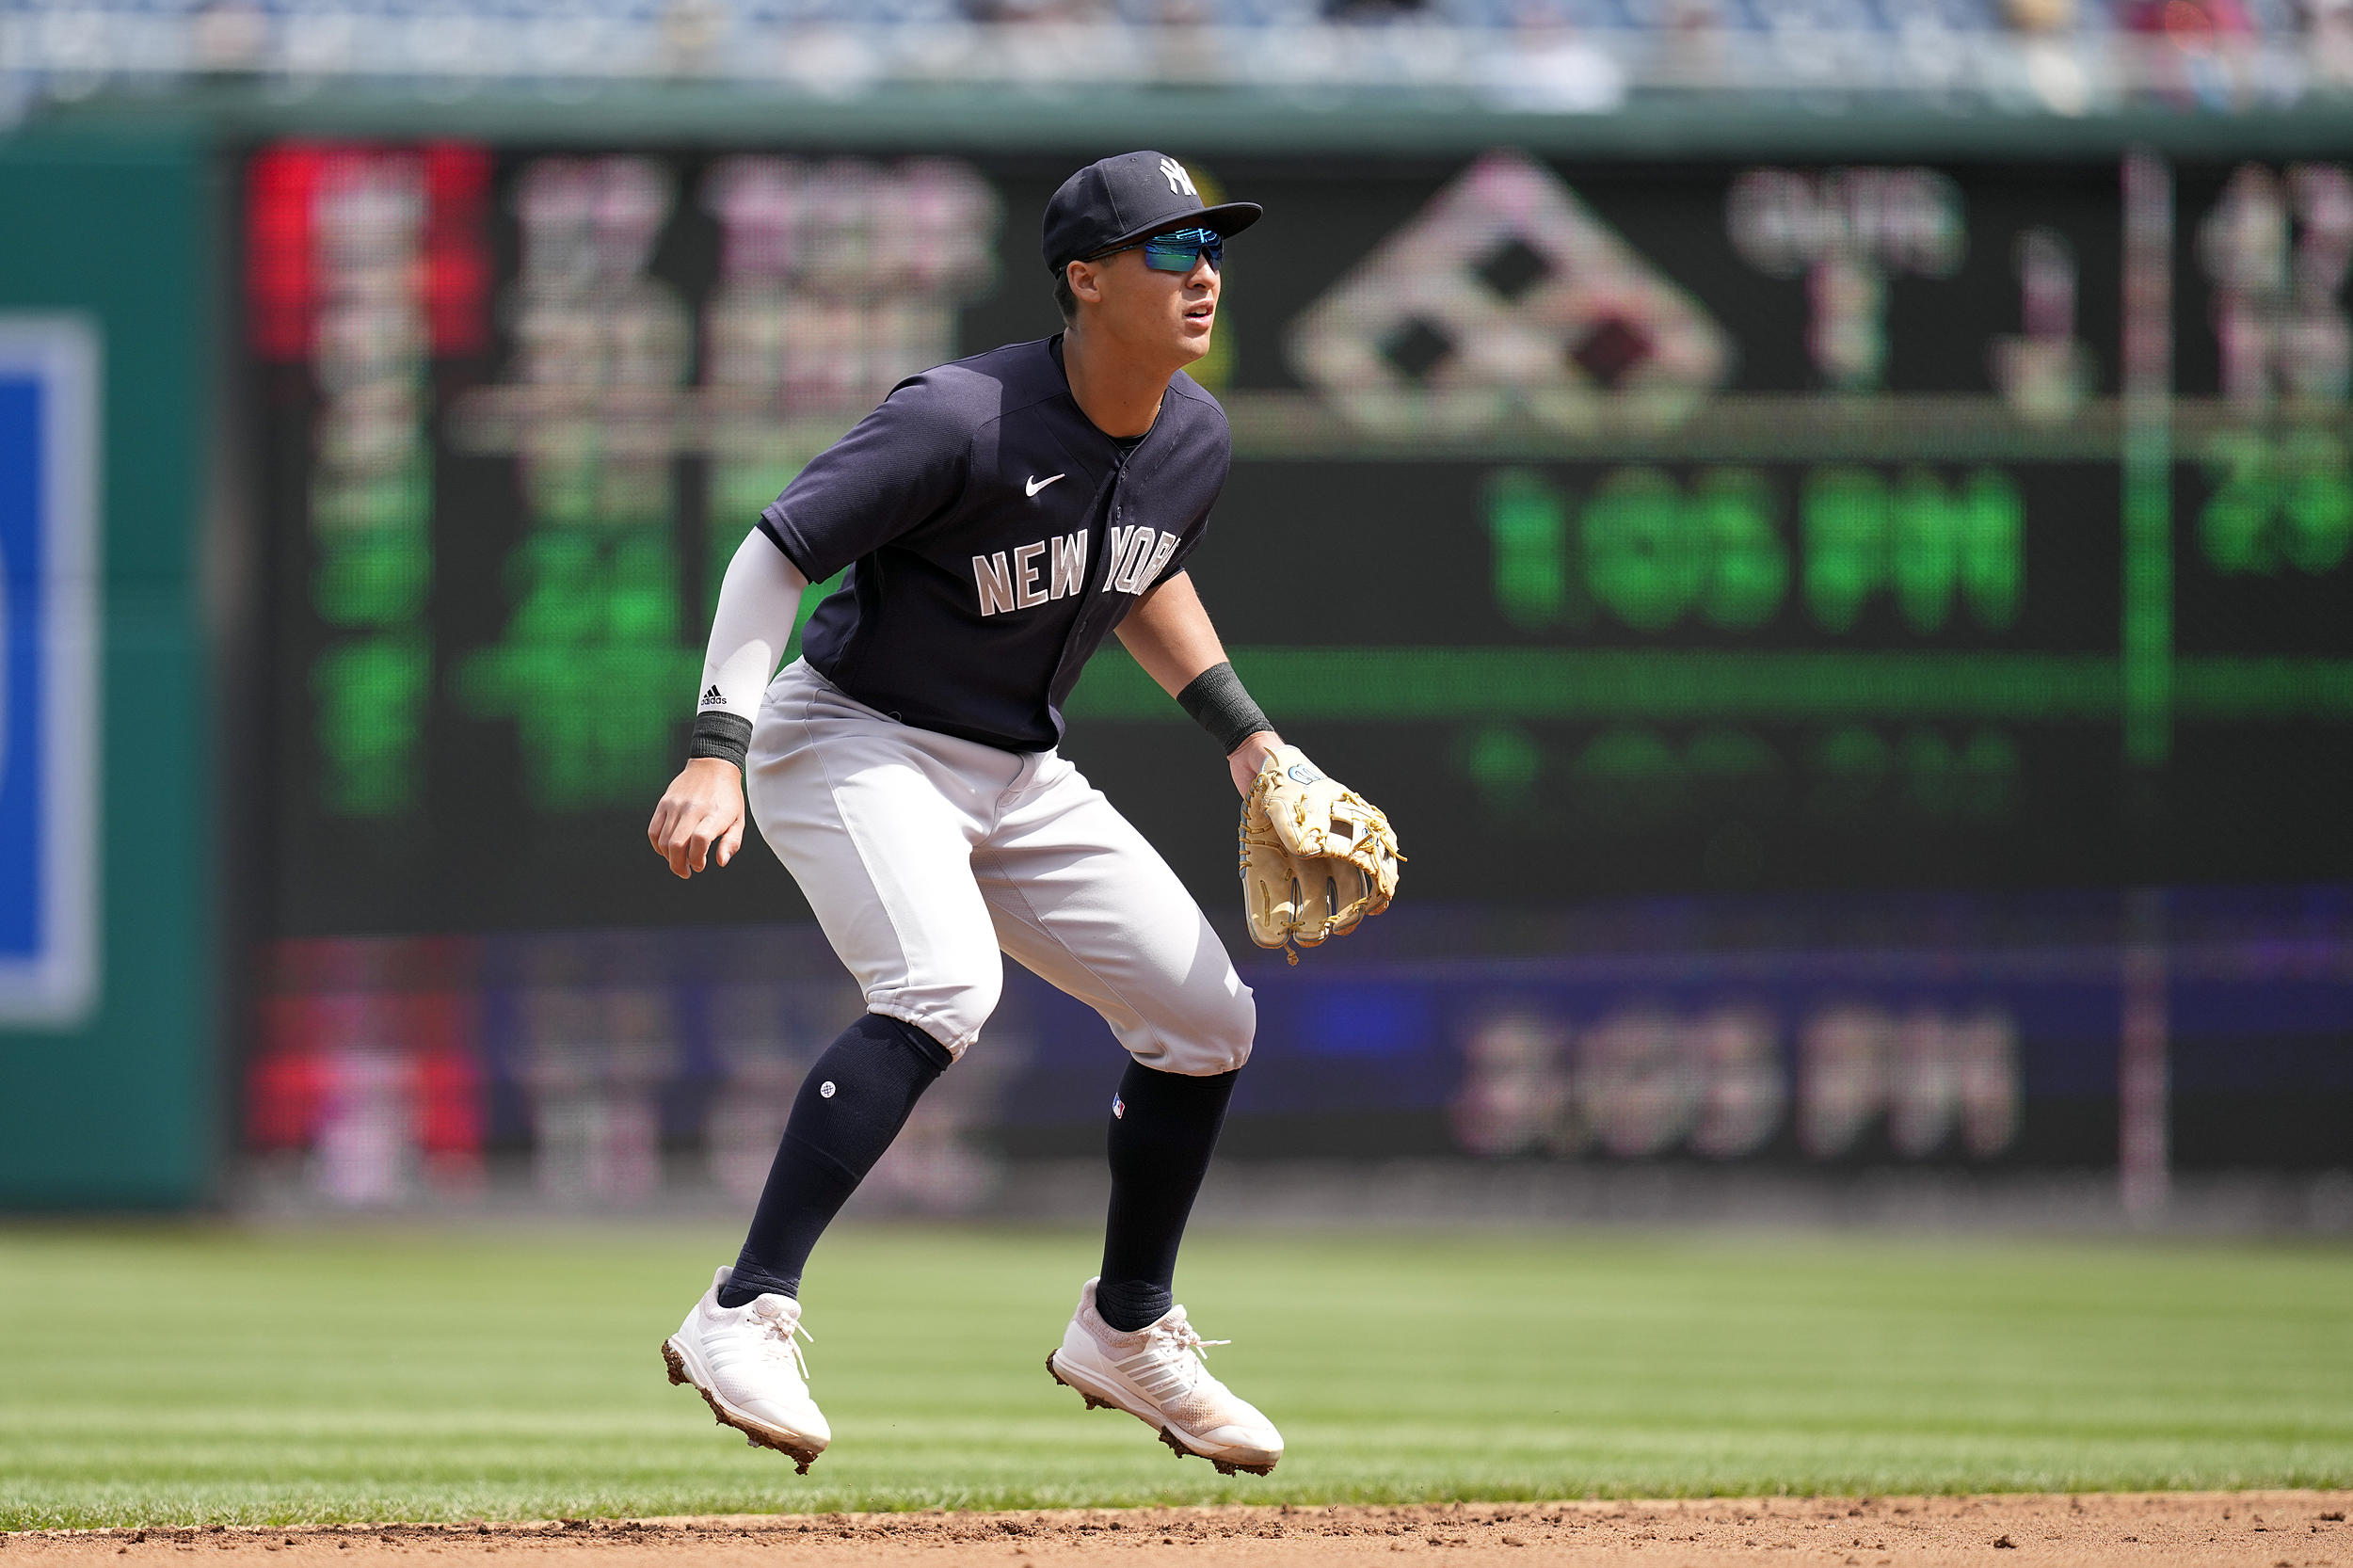 Watchung is home to the Yankees' new shortstop